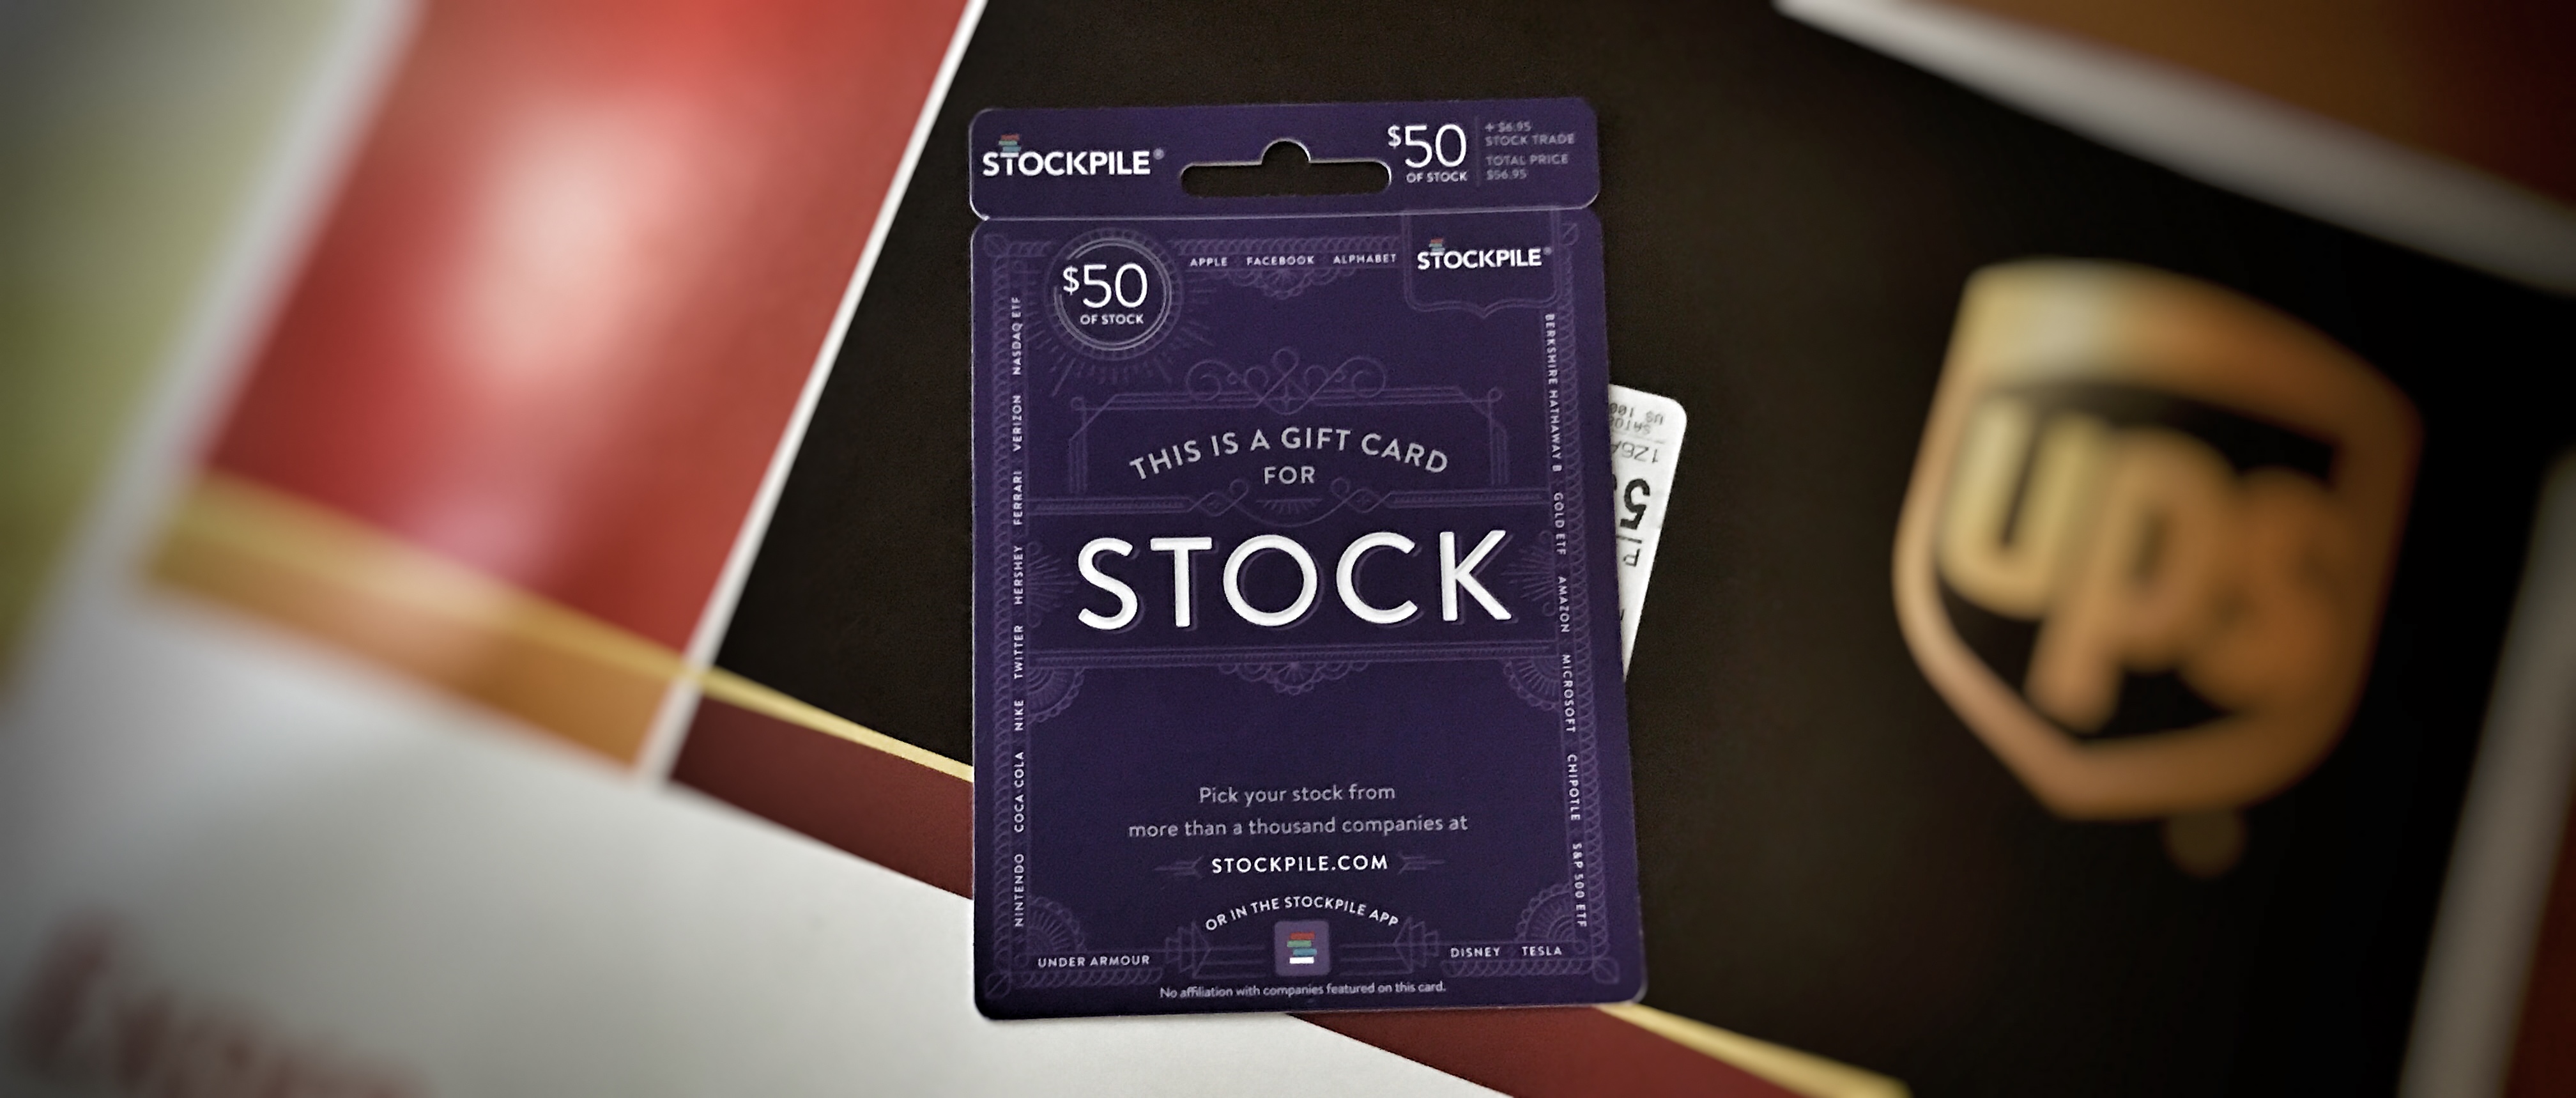 My first Stockpile gift card; I felt I had to use the product before I could write my Stockpile Review